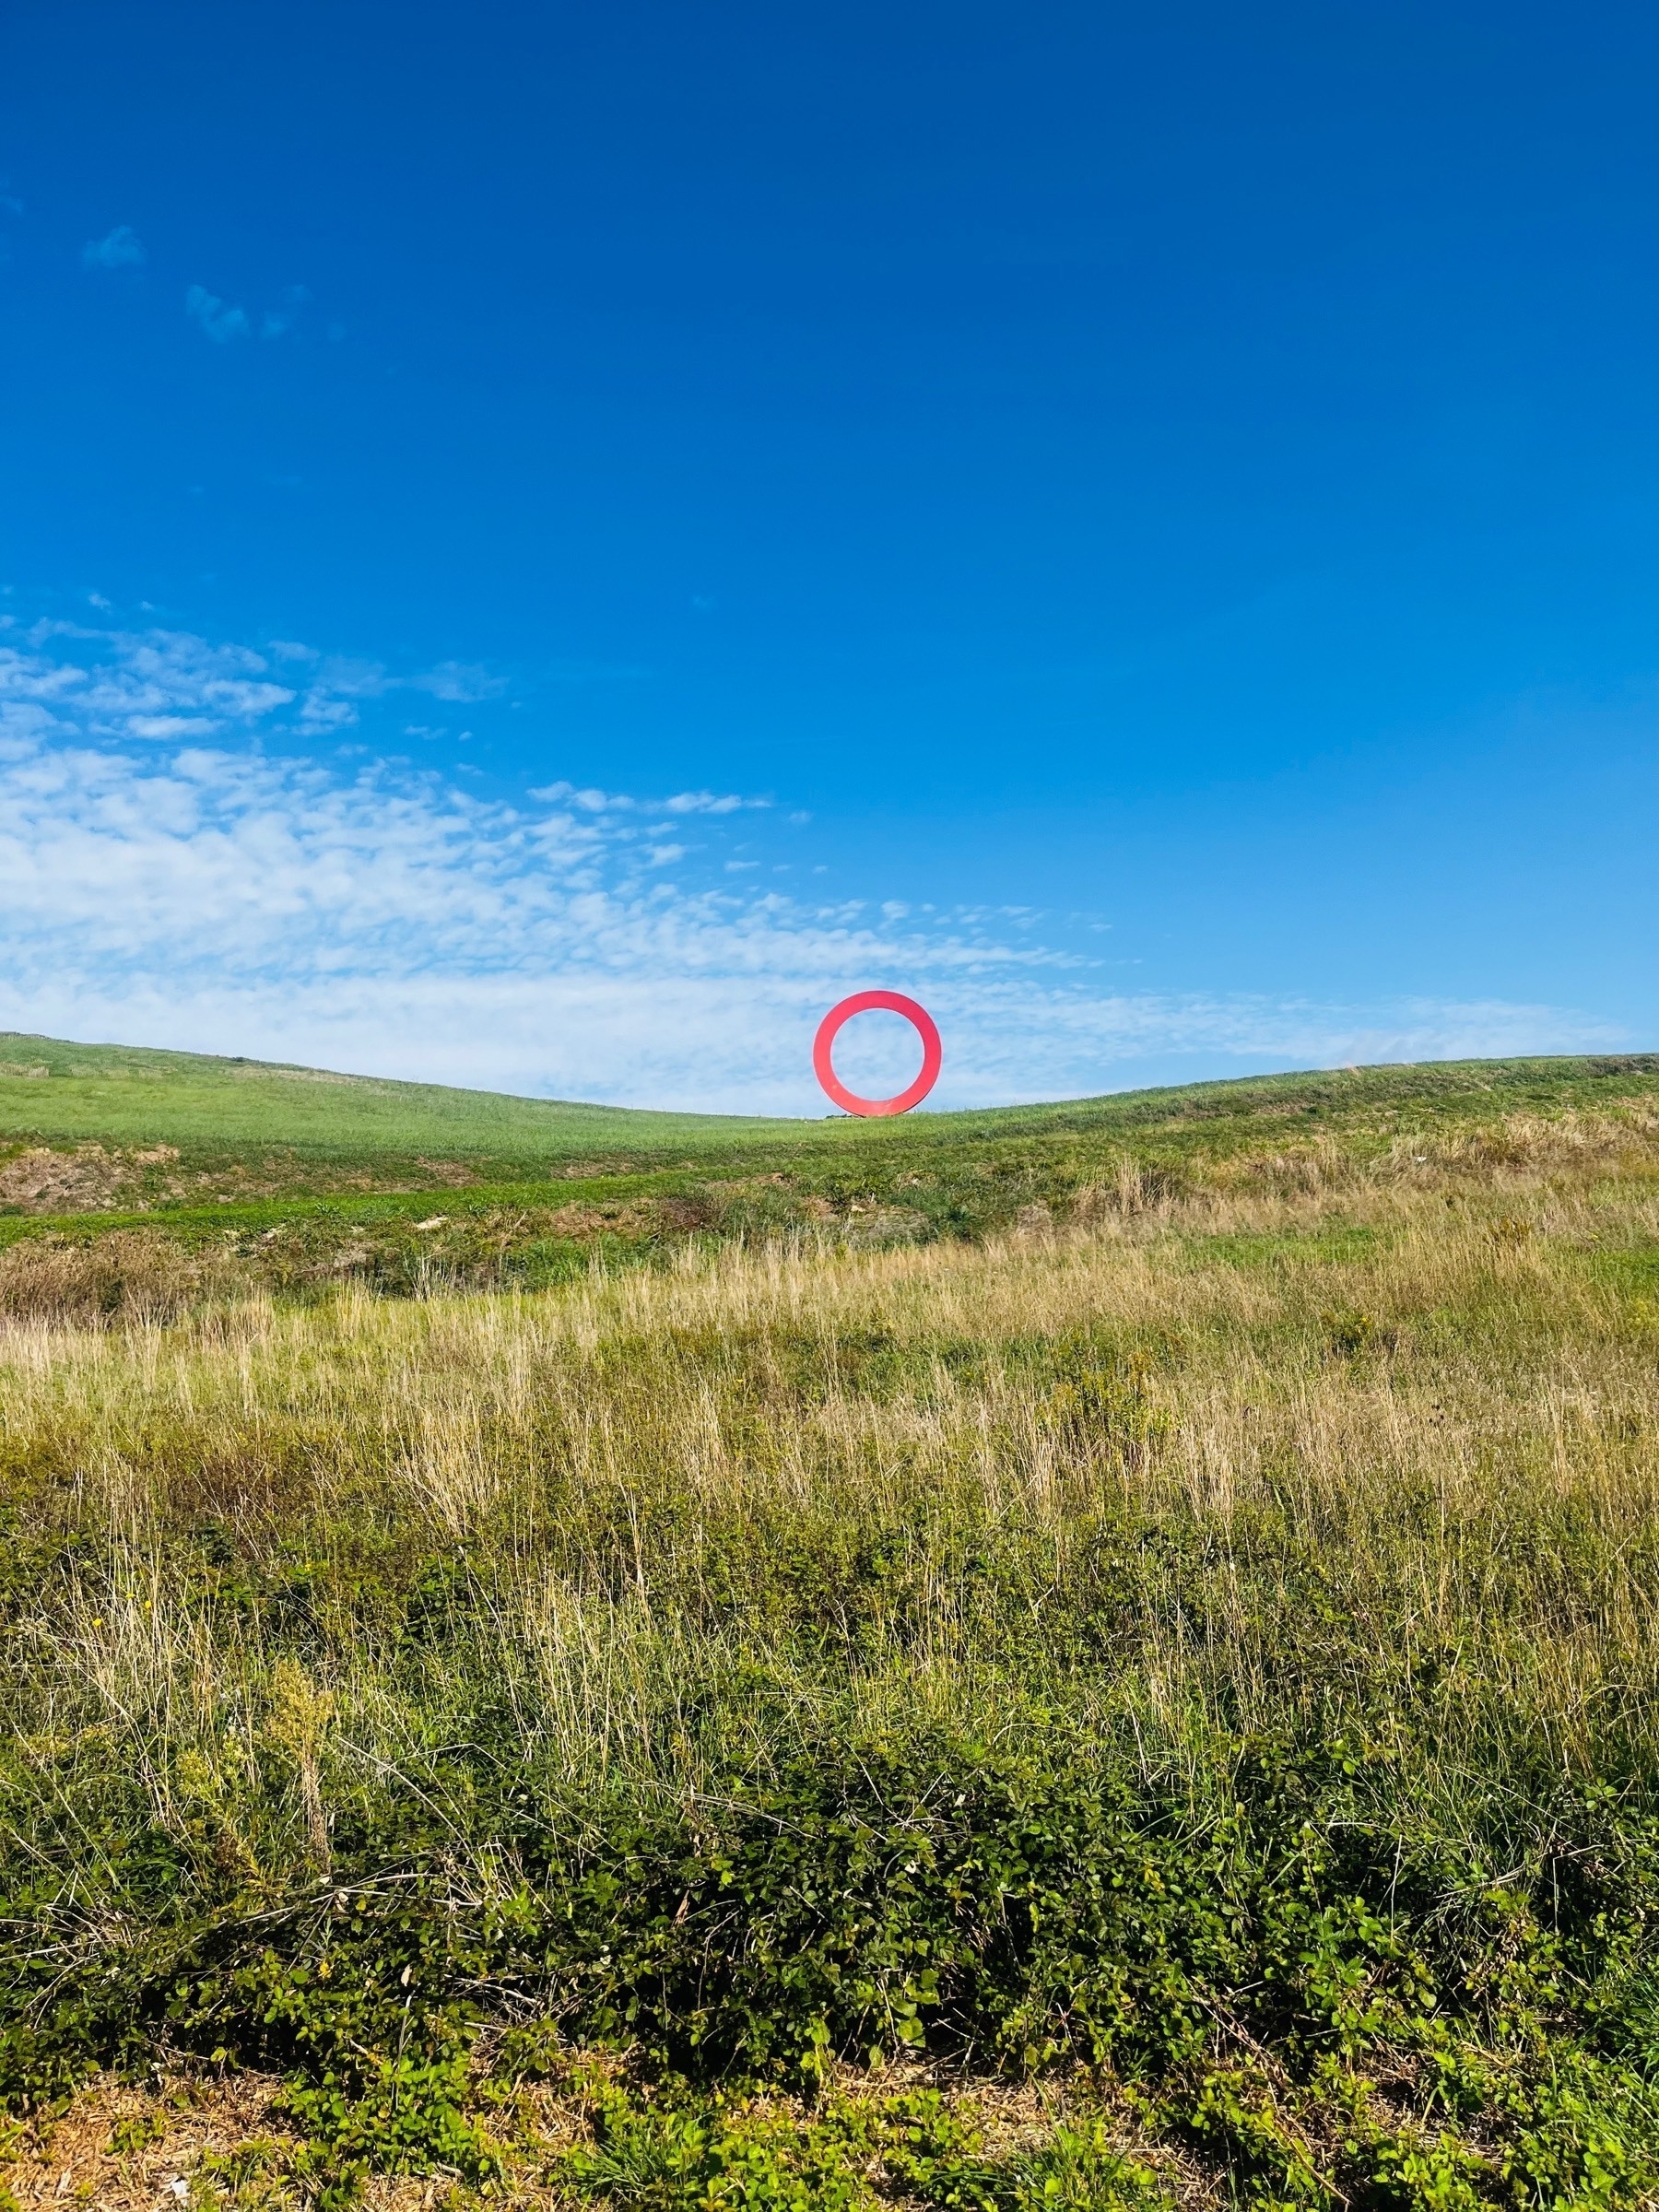 A large red metal circle standing upright in the middle of a field in Volterra, Italy